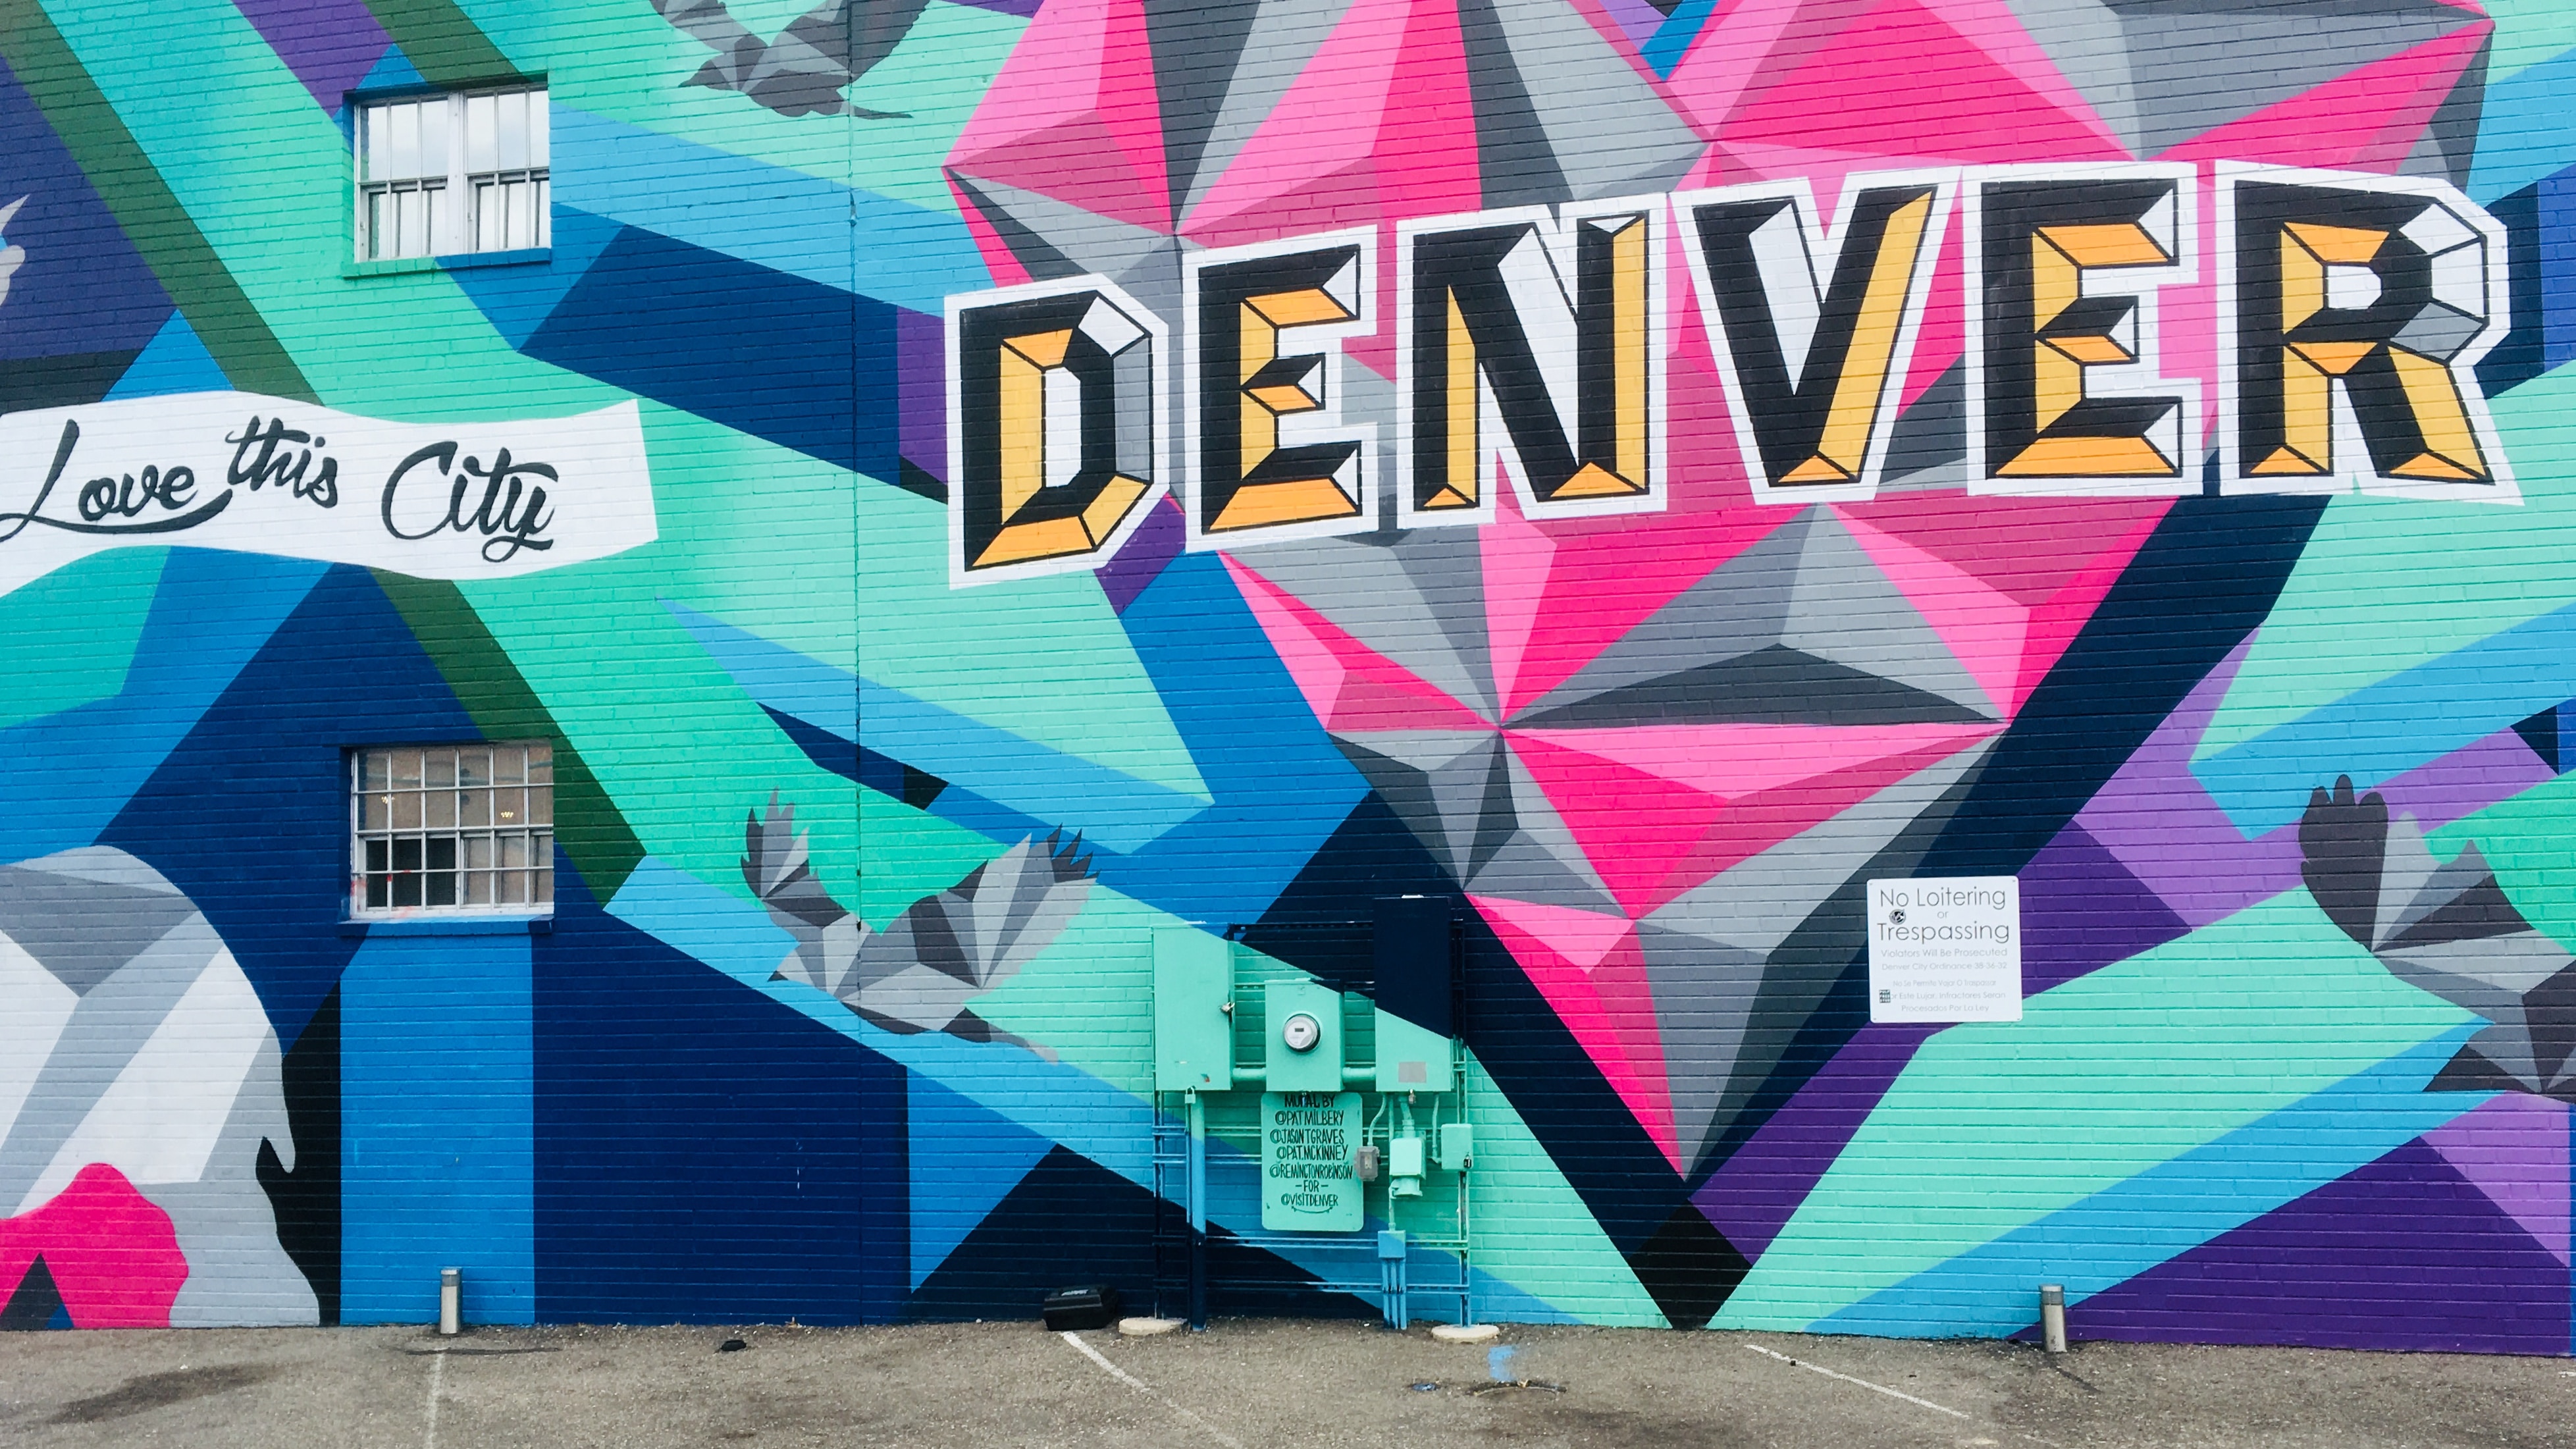 A wall in Denver which has colorful artful graffiti is shown reading ‘Love this city’ in white and ‘DENVER’ in big block black and yellow letters